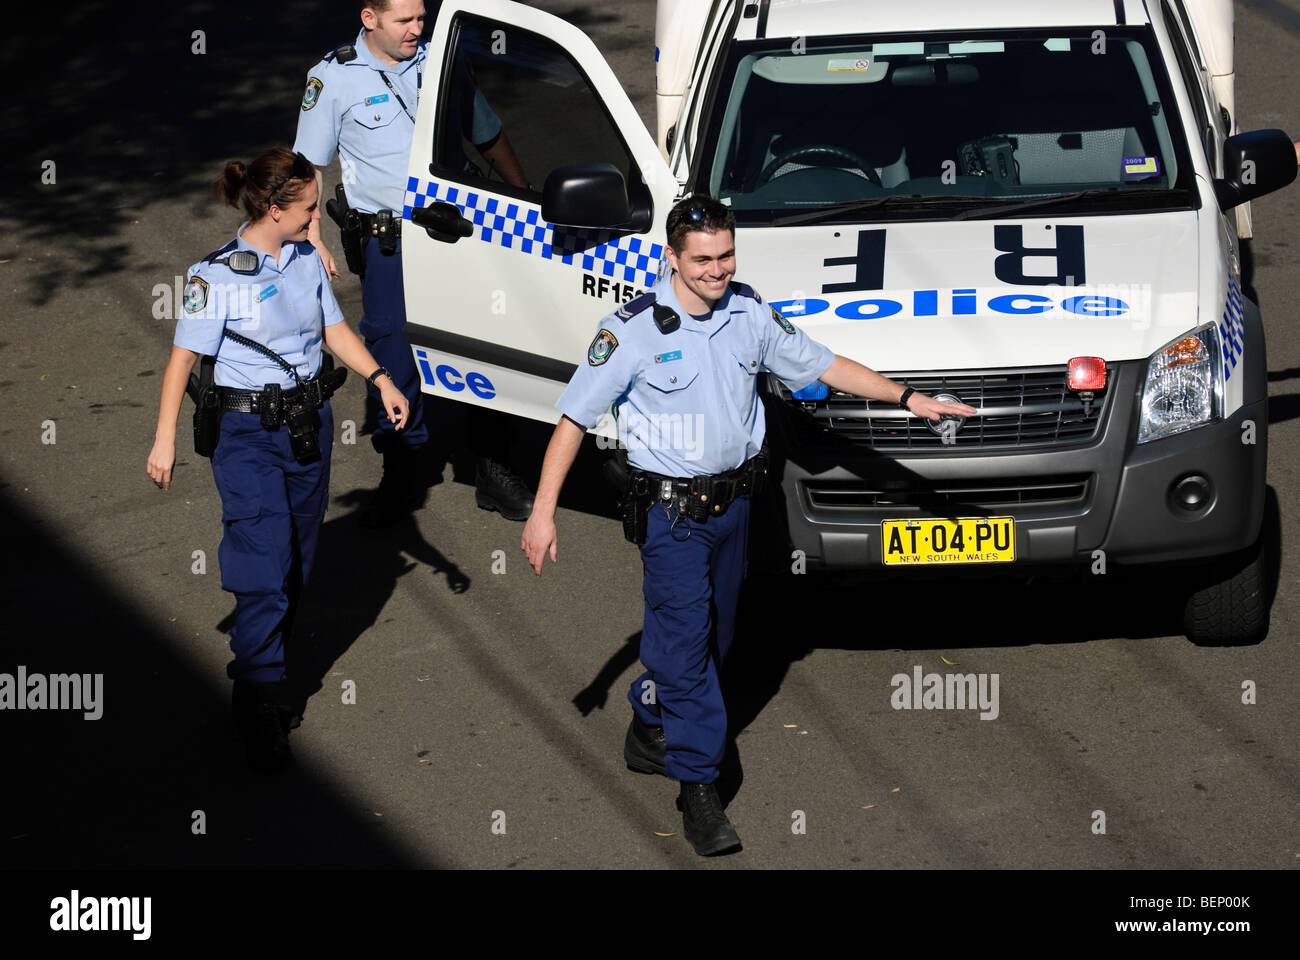 Cheerful police return to their vehicles after making an arrest. Stock Photo